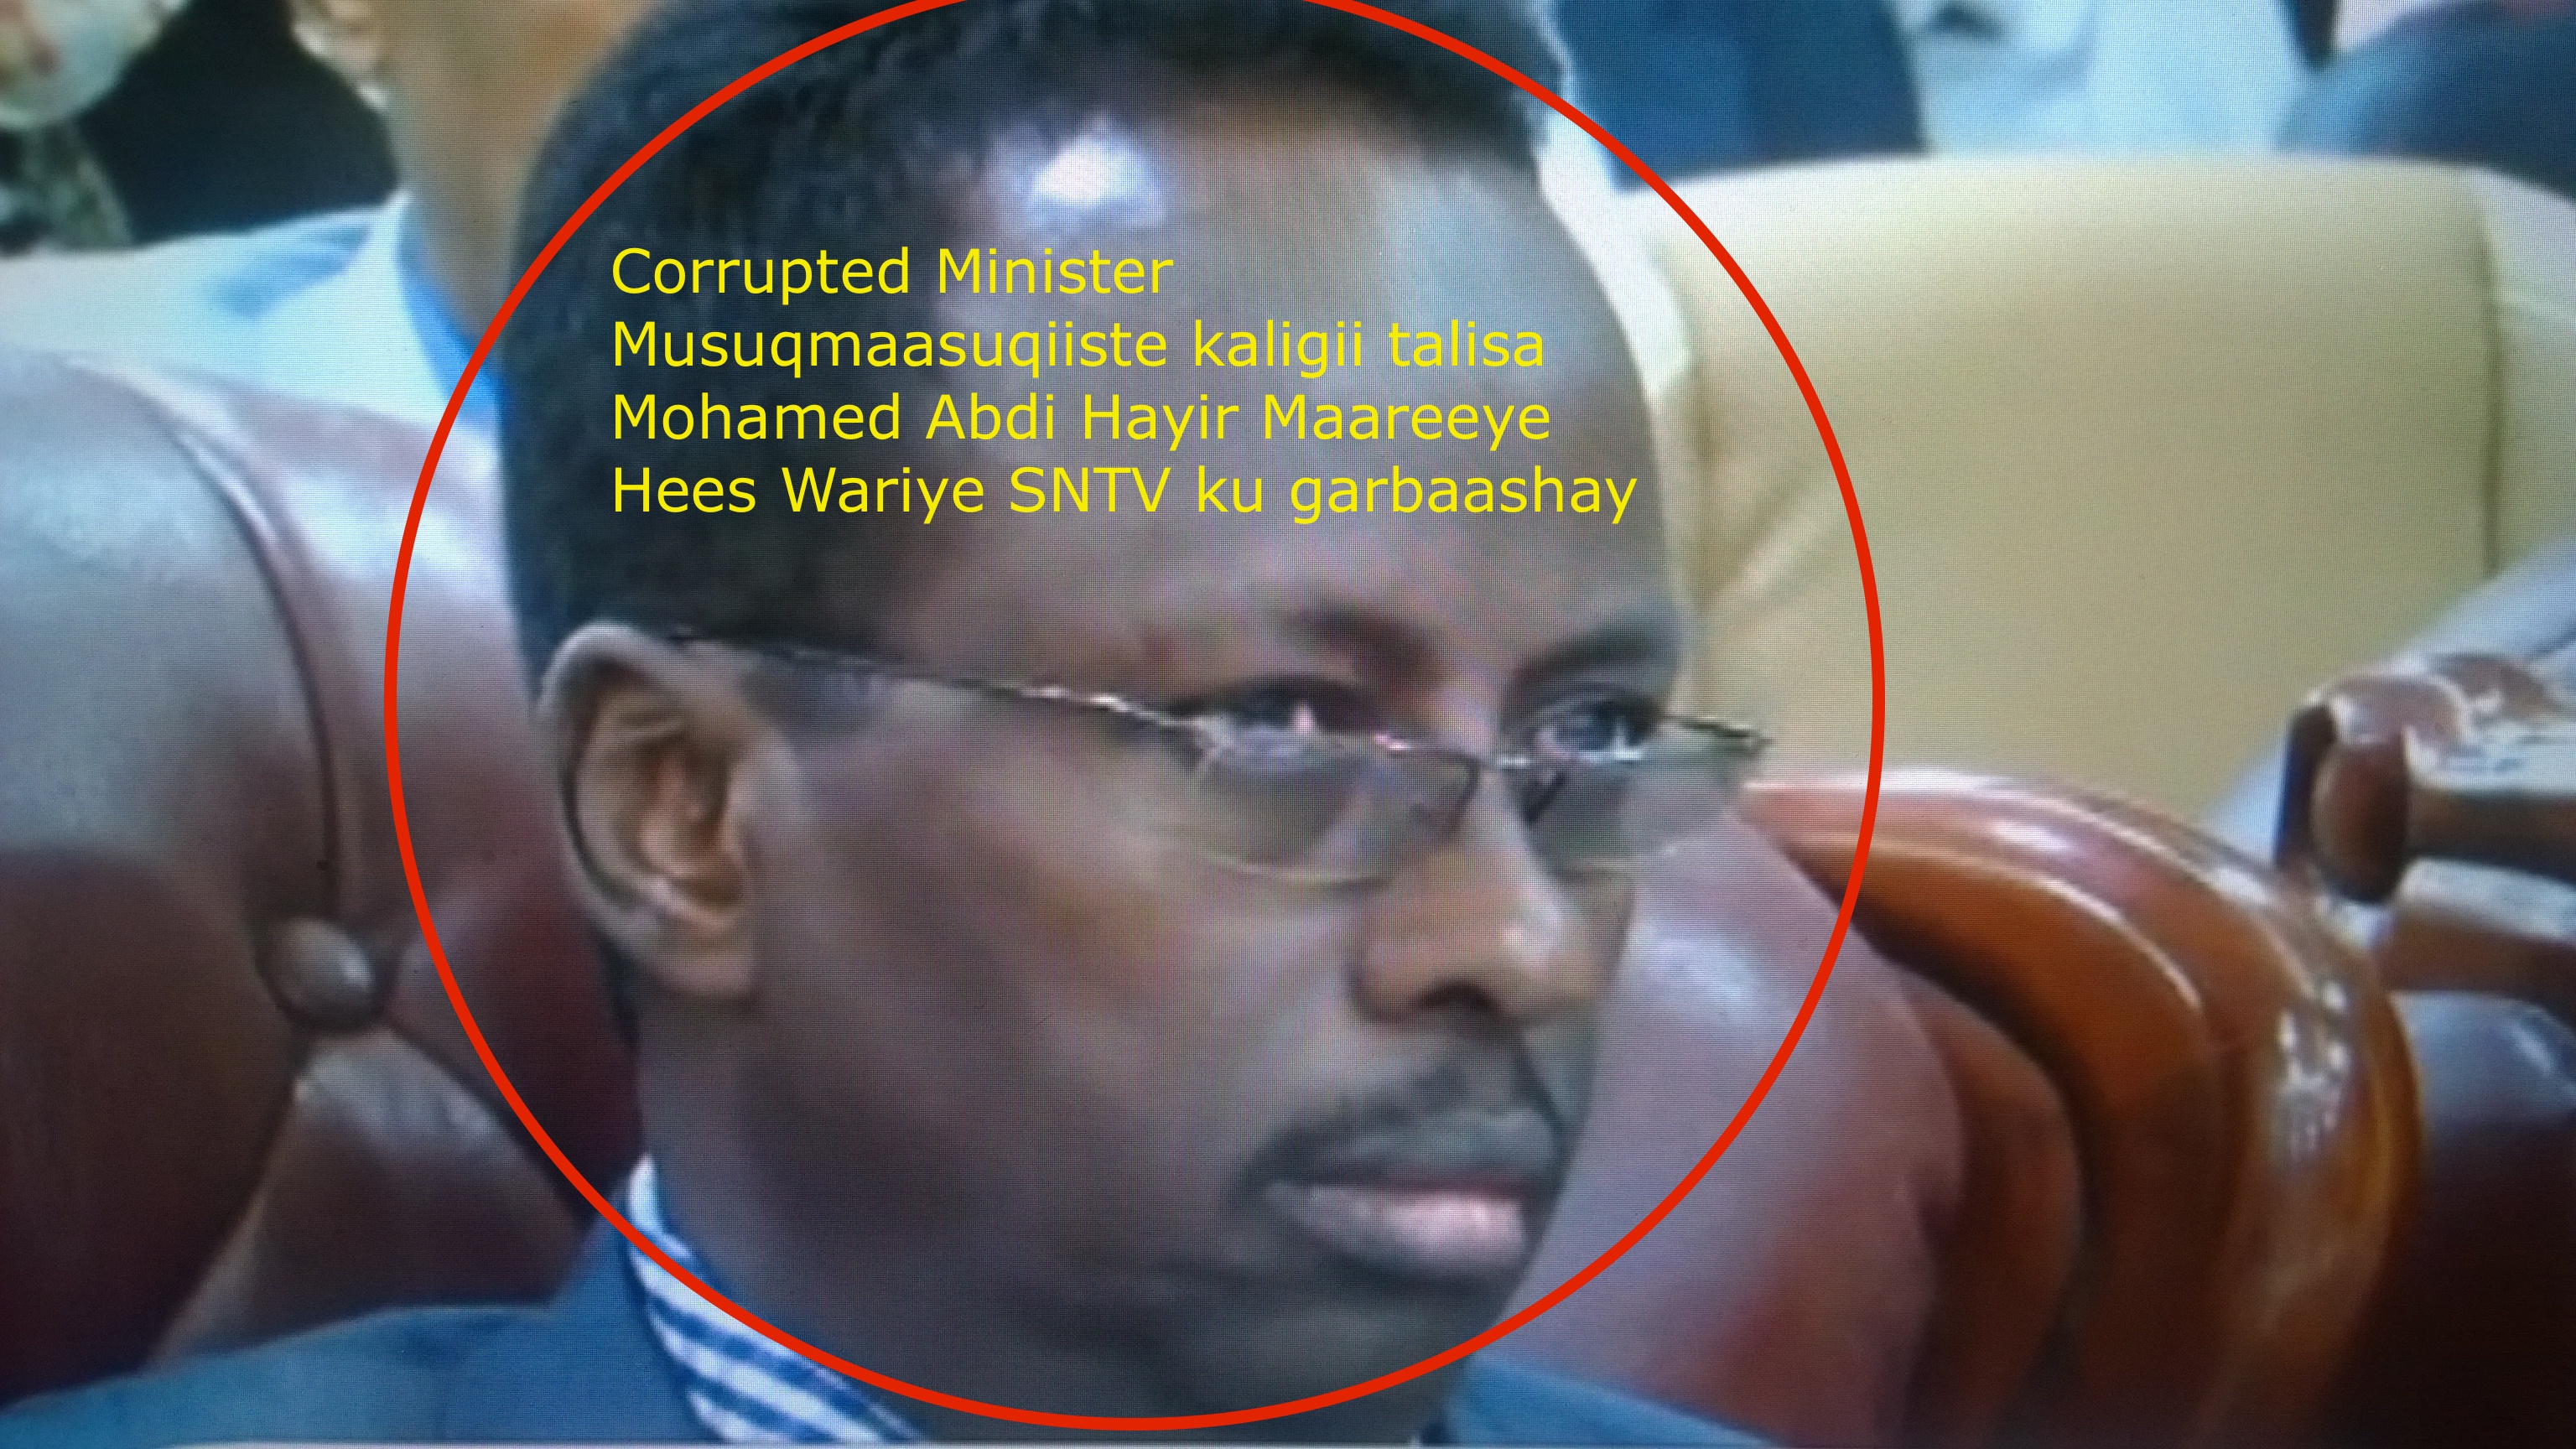 Somalia:Minister of Information caught stealing